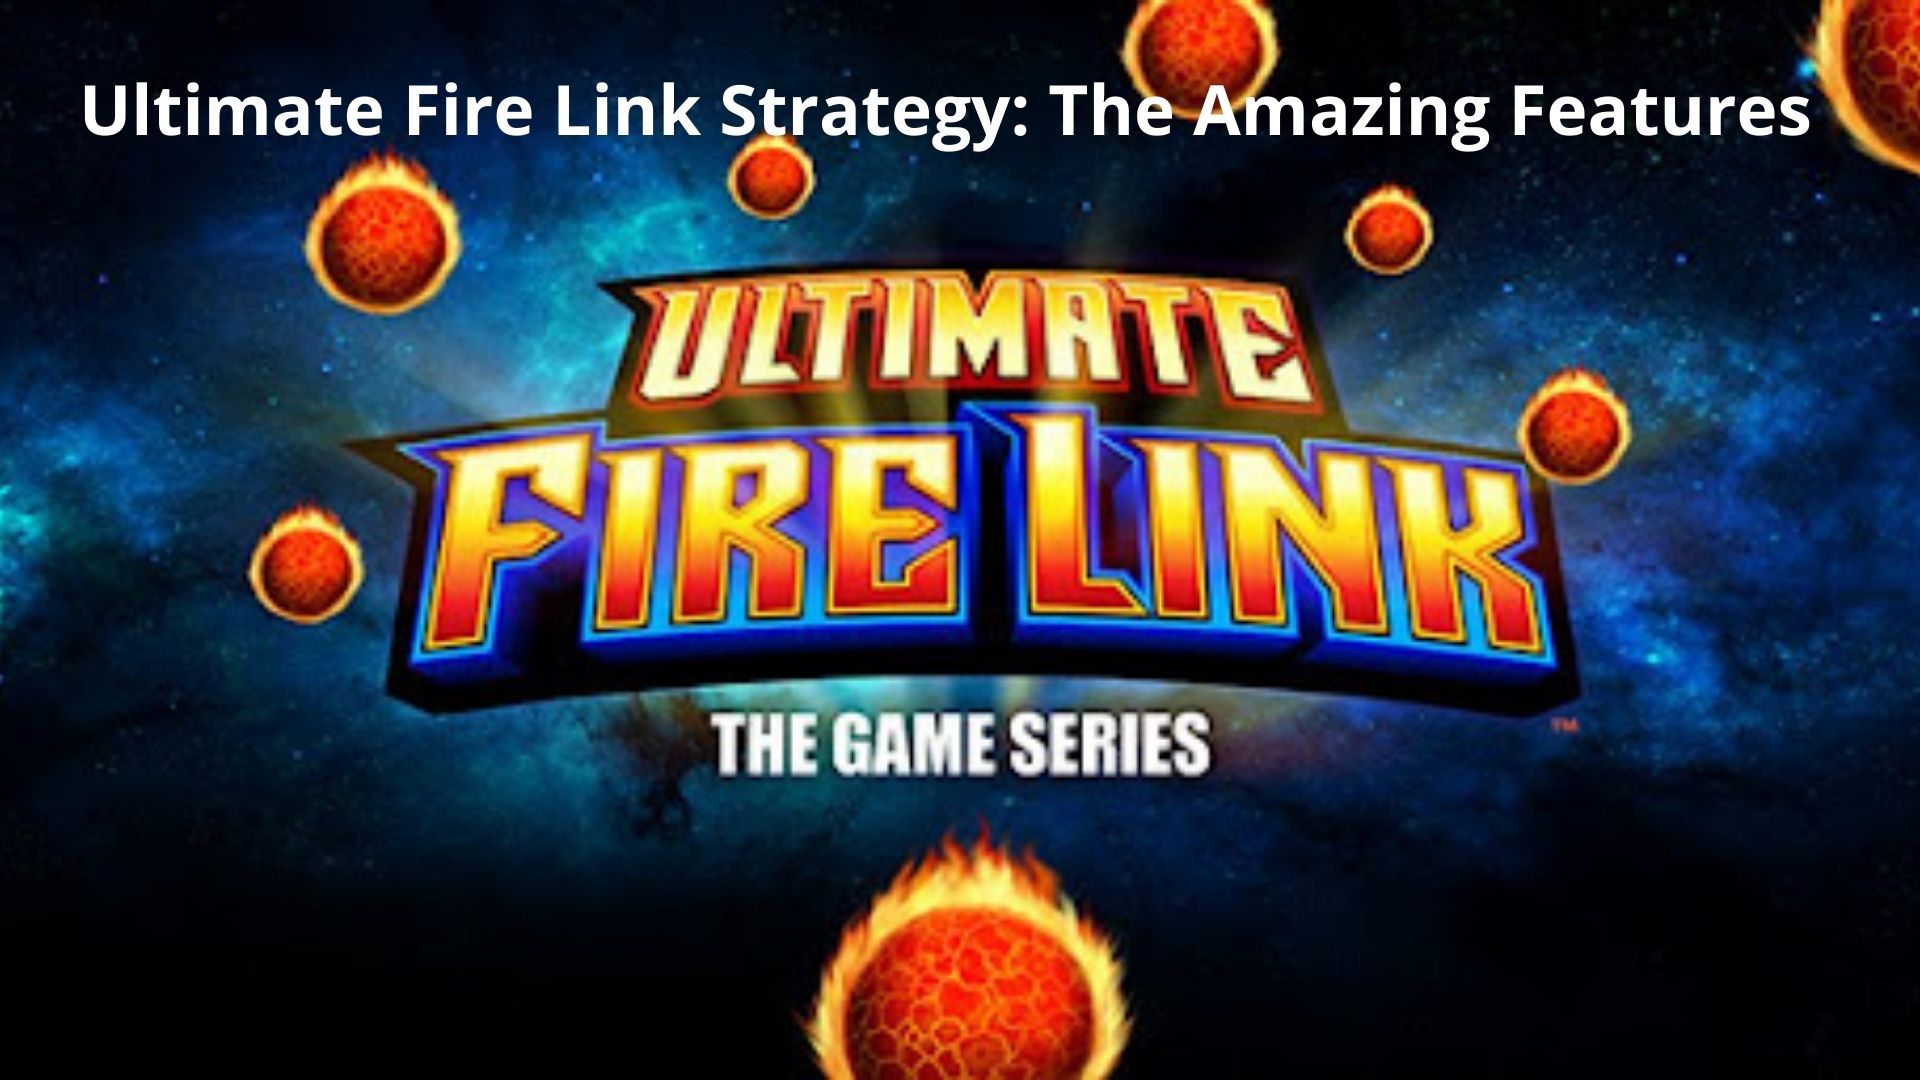 Ultimate Fire Link Strategy